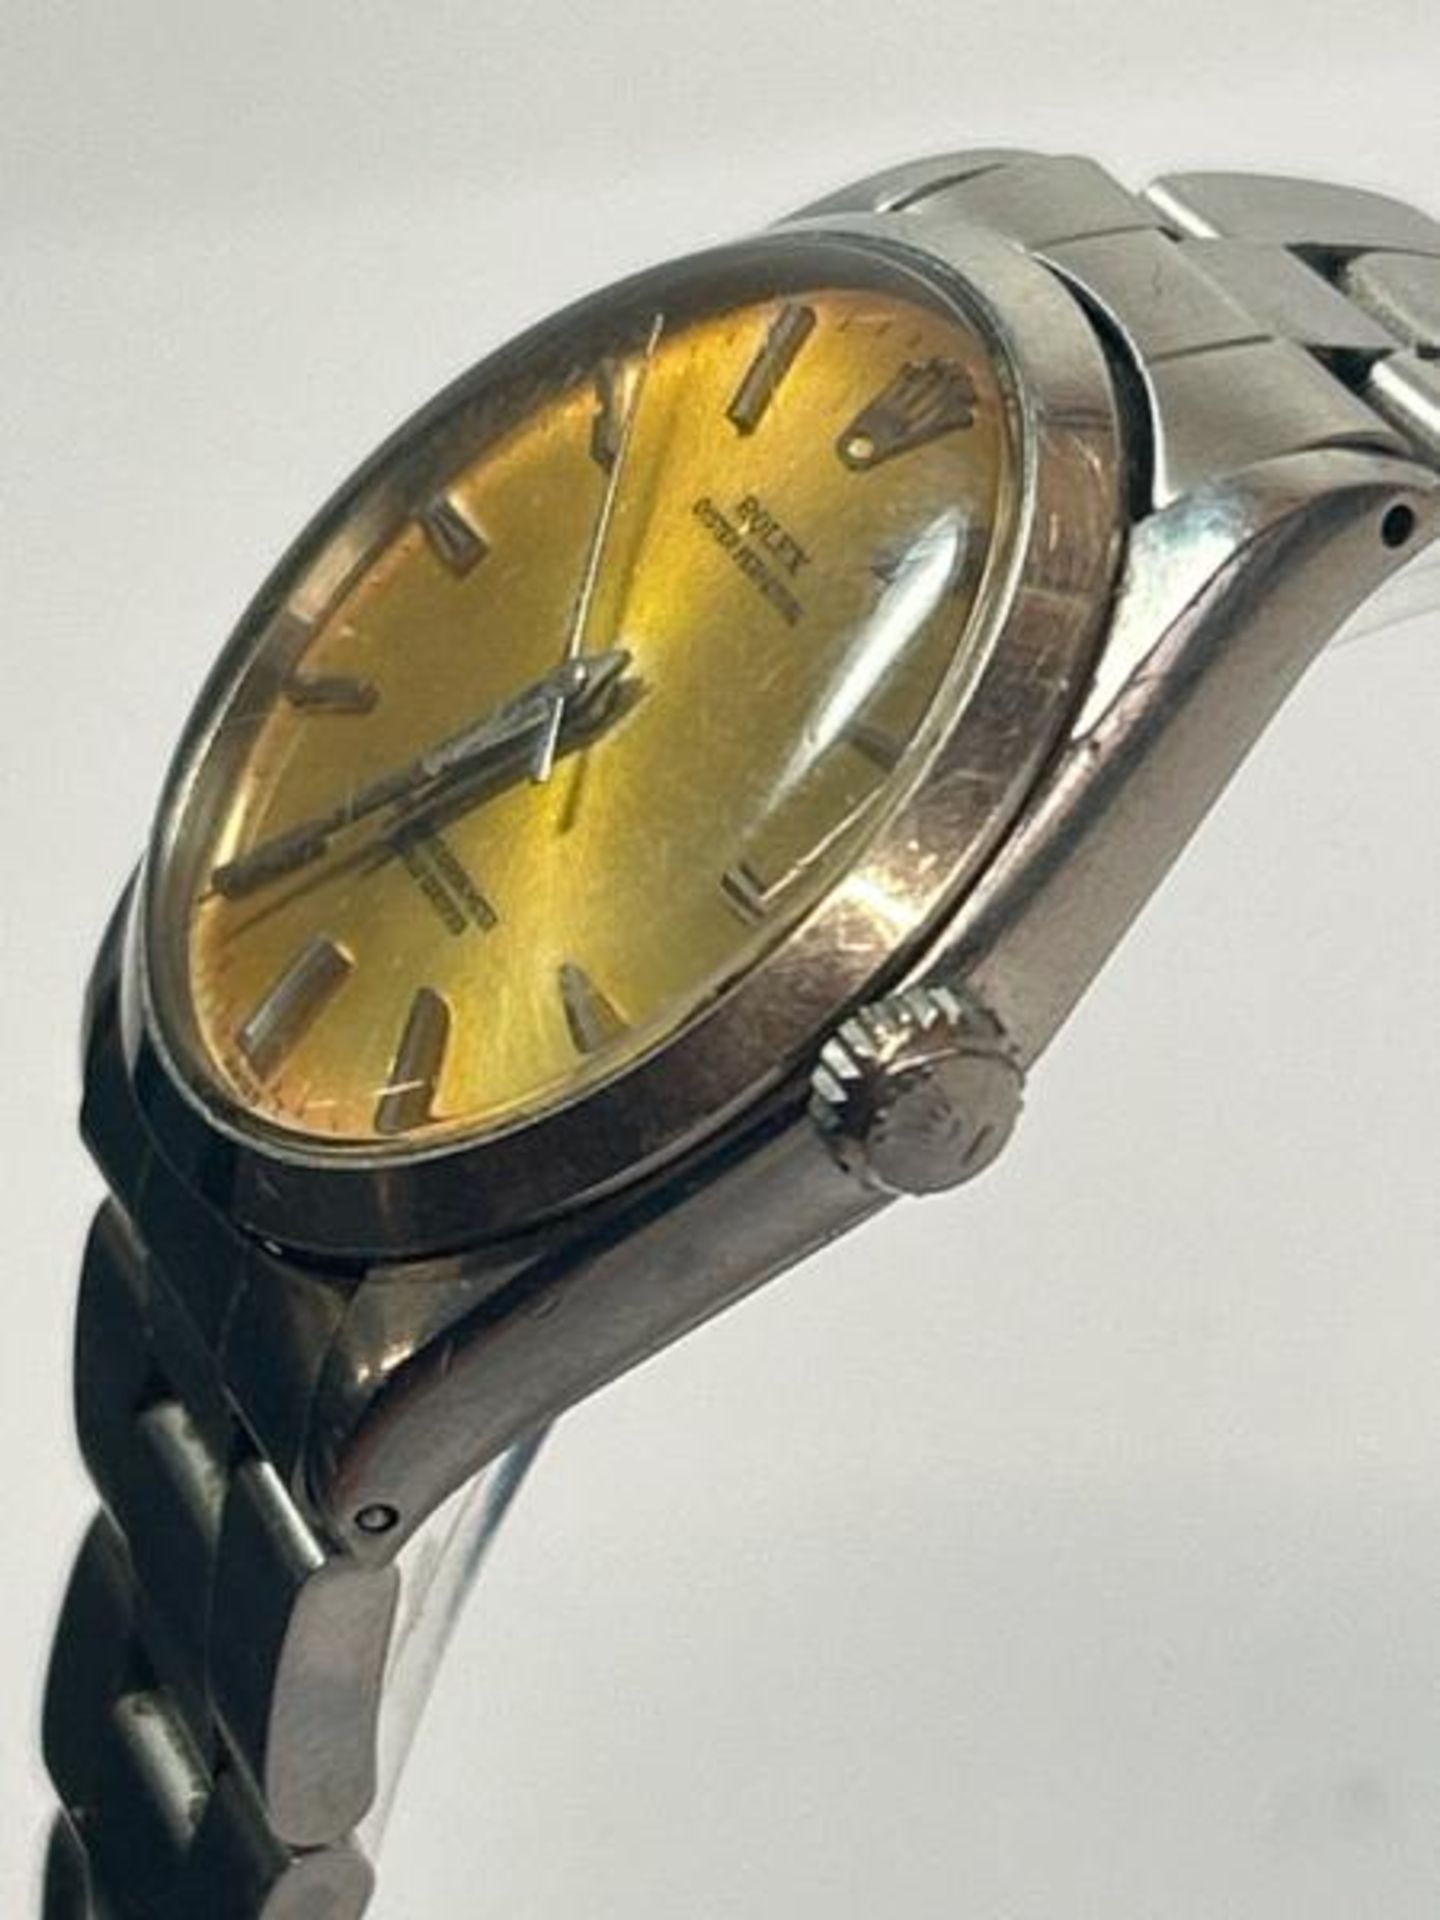 Gents vintage 1965 Rolex Oyster, perpetual superlature chronometer watch with champagne dial and - Bild 2 aus 11